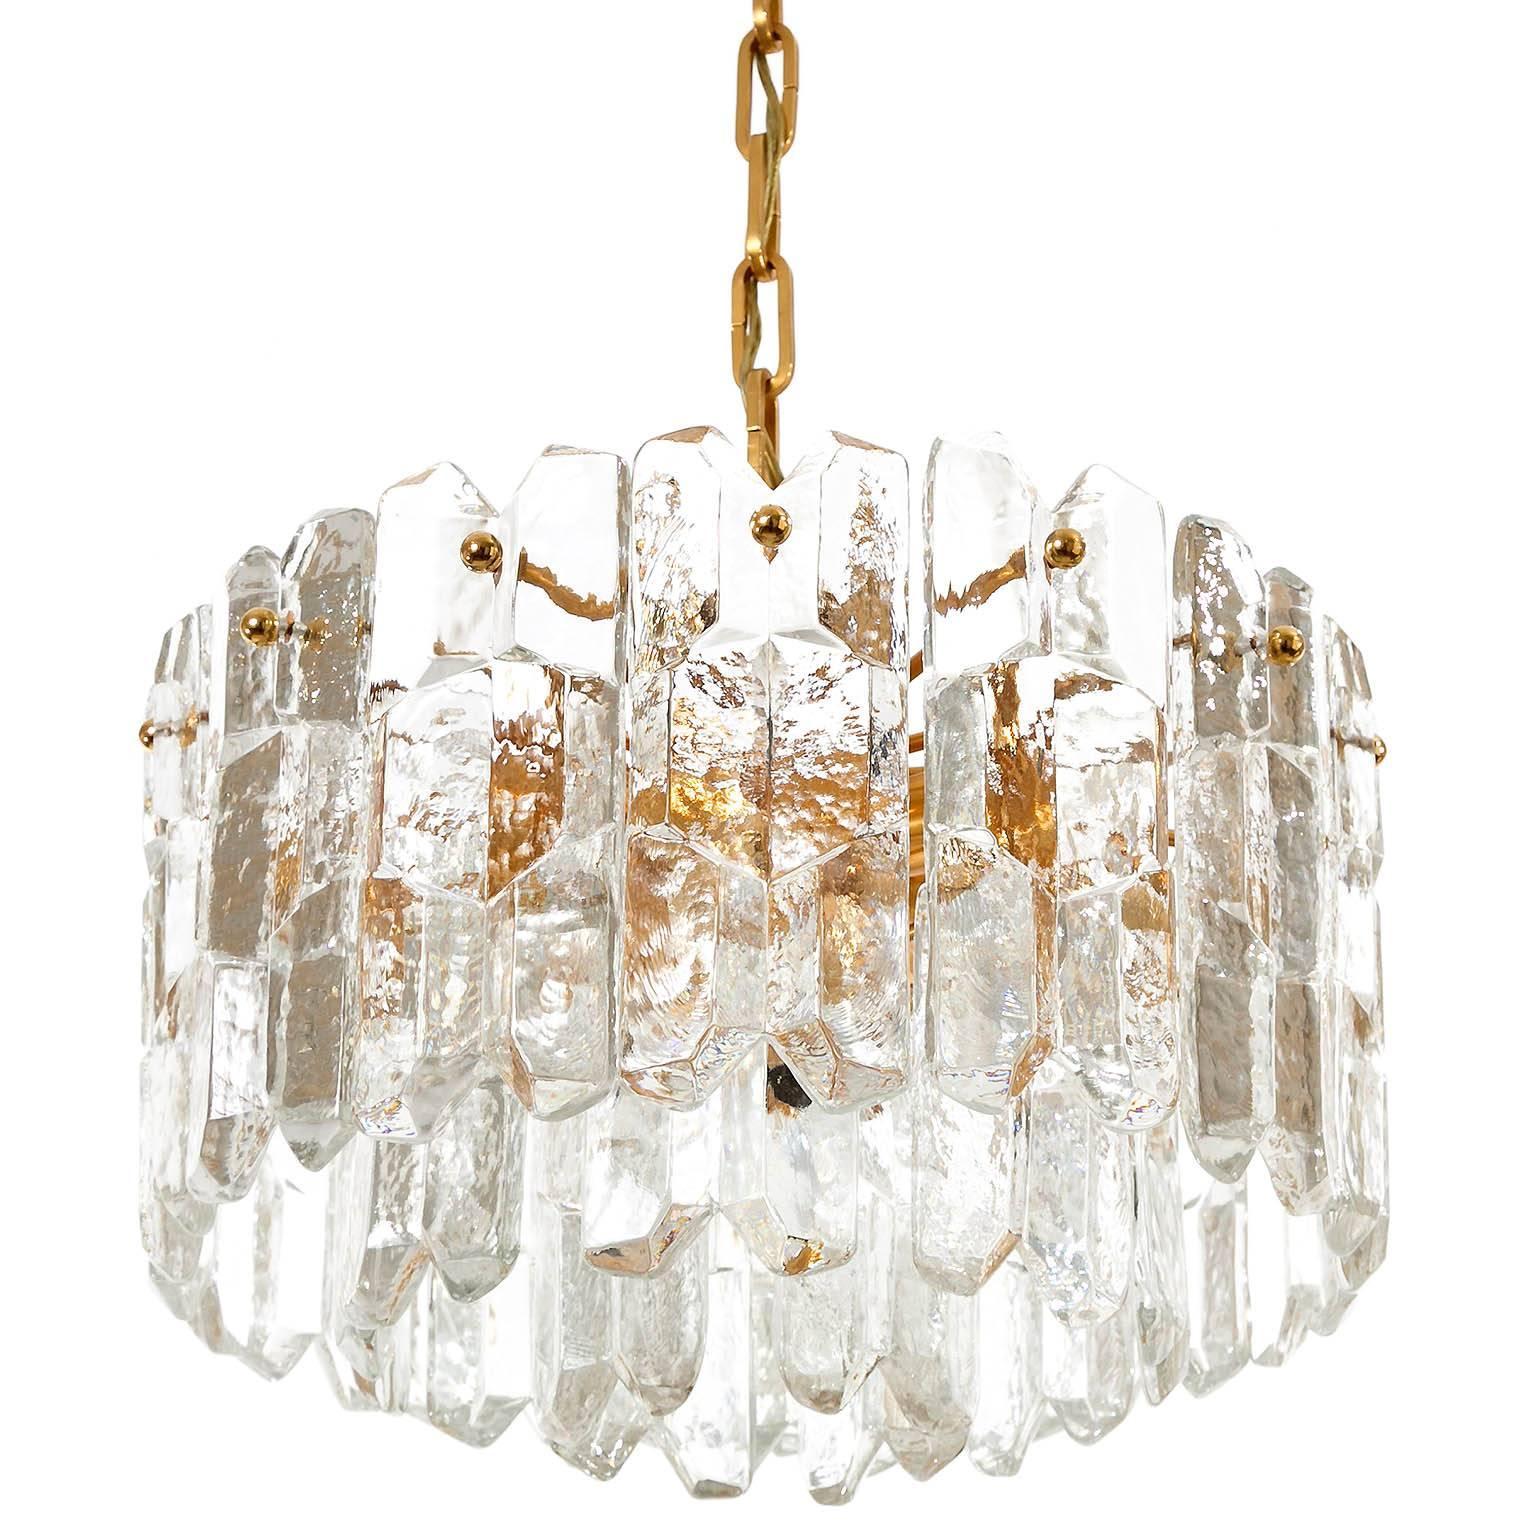 A very exquisite 24-carat gold-plated brass and clear brillant glass Hollywood Regency light fixture model 'Palazzo' by J.T. Kalmar, Vienna, Austria, manufactured in midcentury, circa 1970 (late 1960s or early 1970s).
The lamp is marked with a